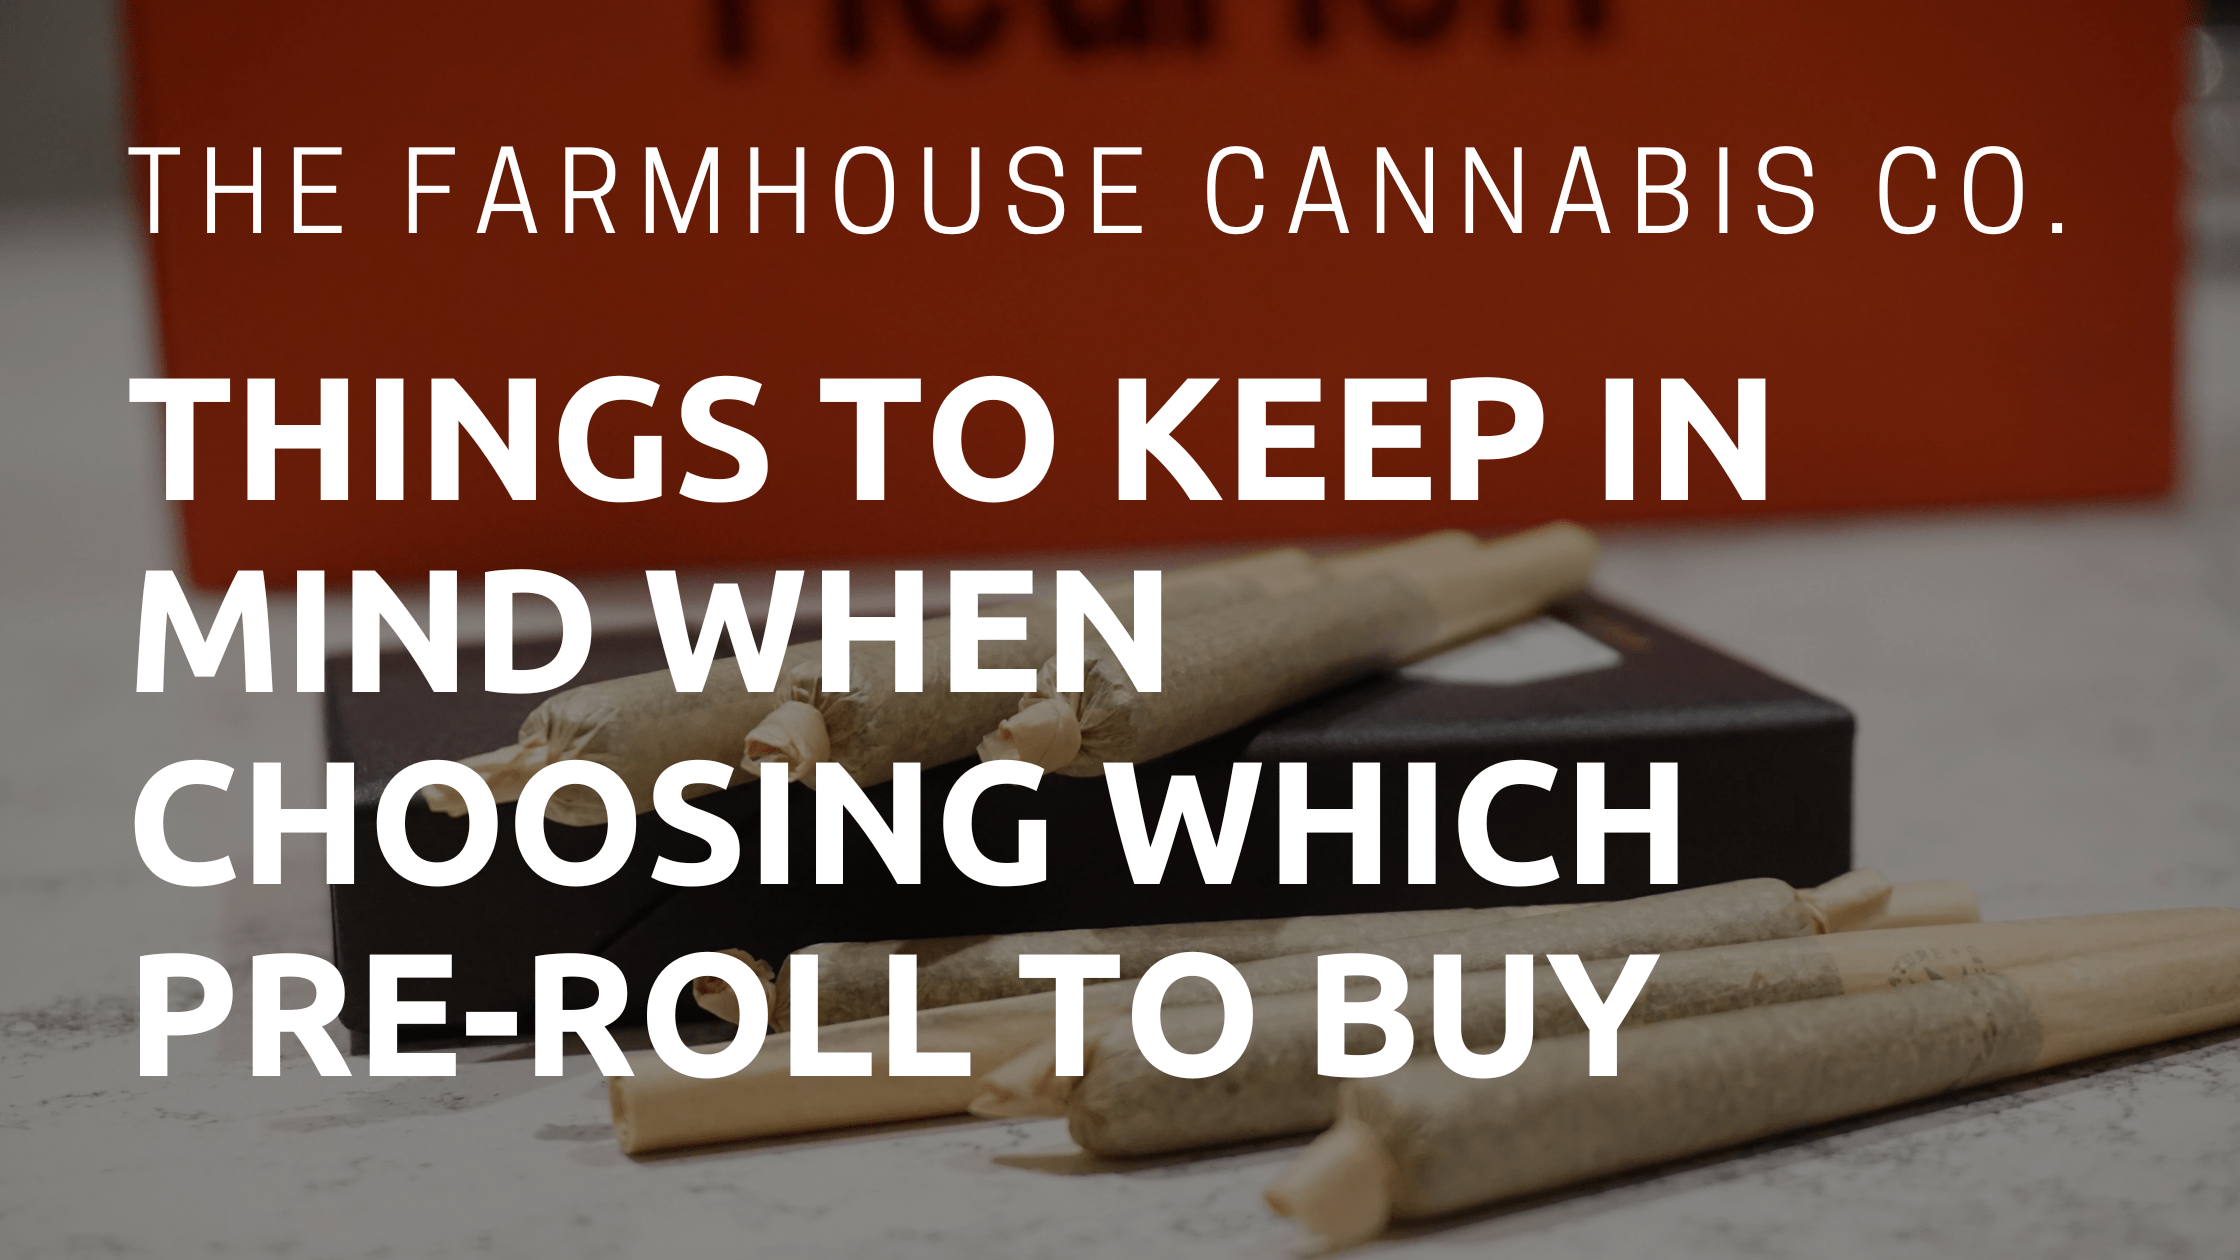 Choosing a pre-roll to buy is difficult. We buying weed easy at the Farmhouse Cannabis